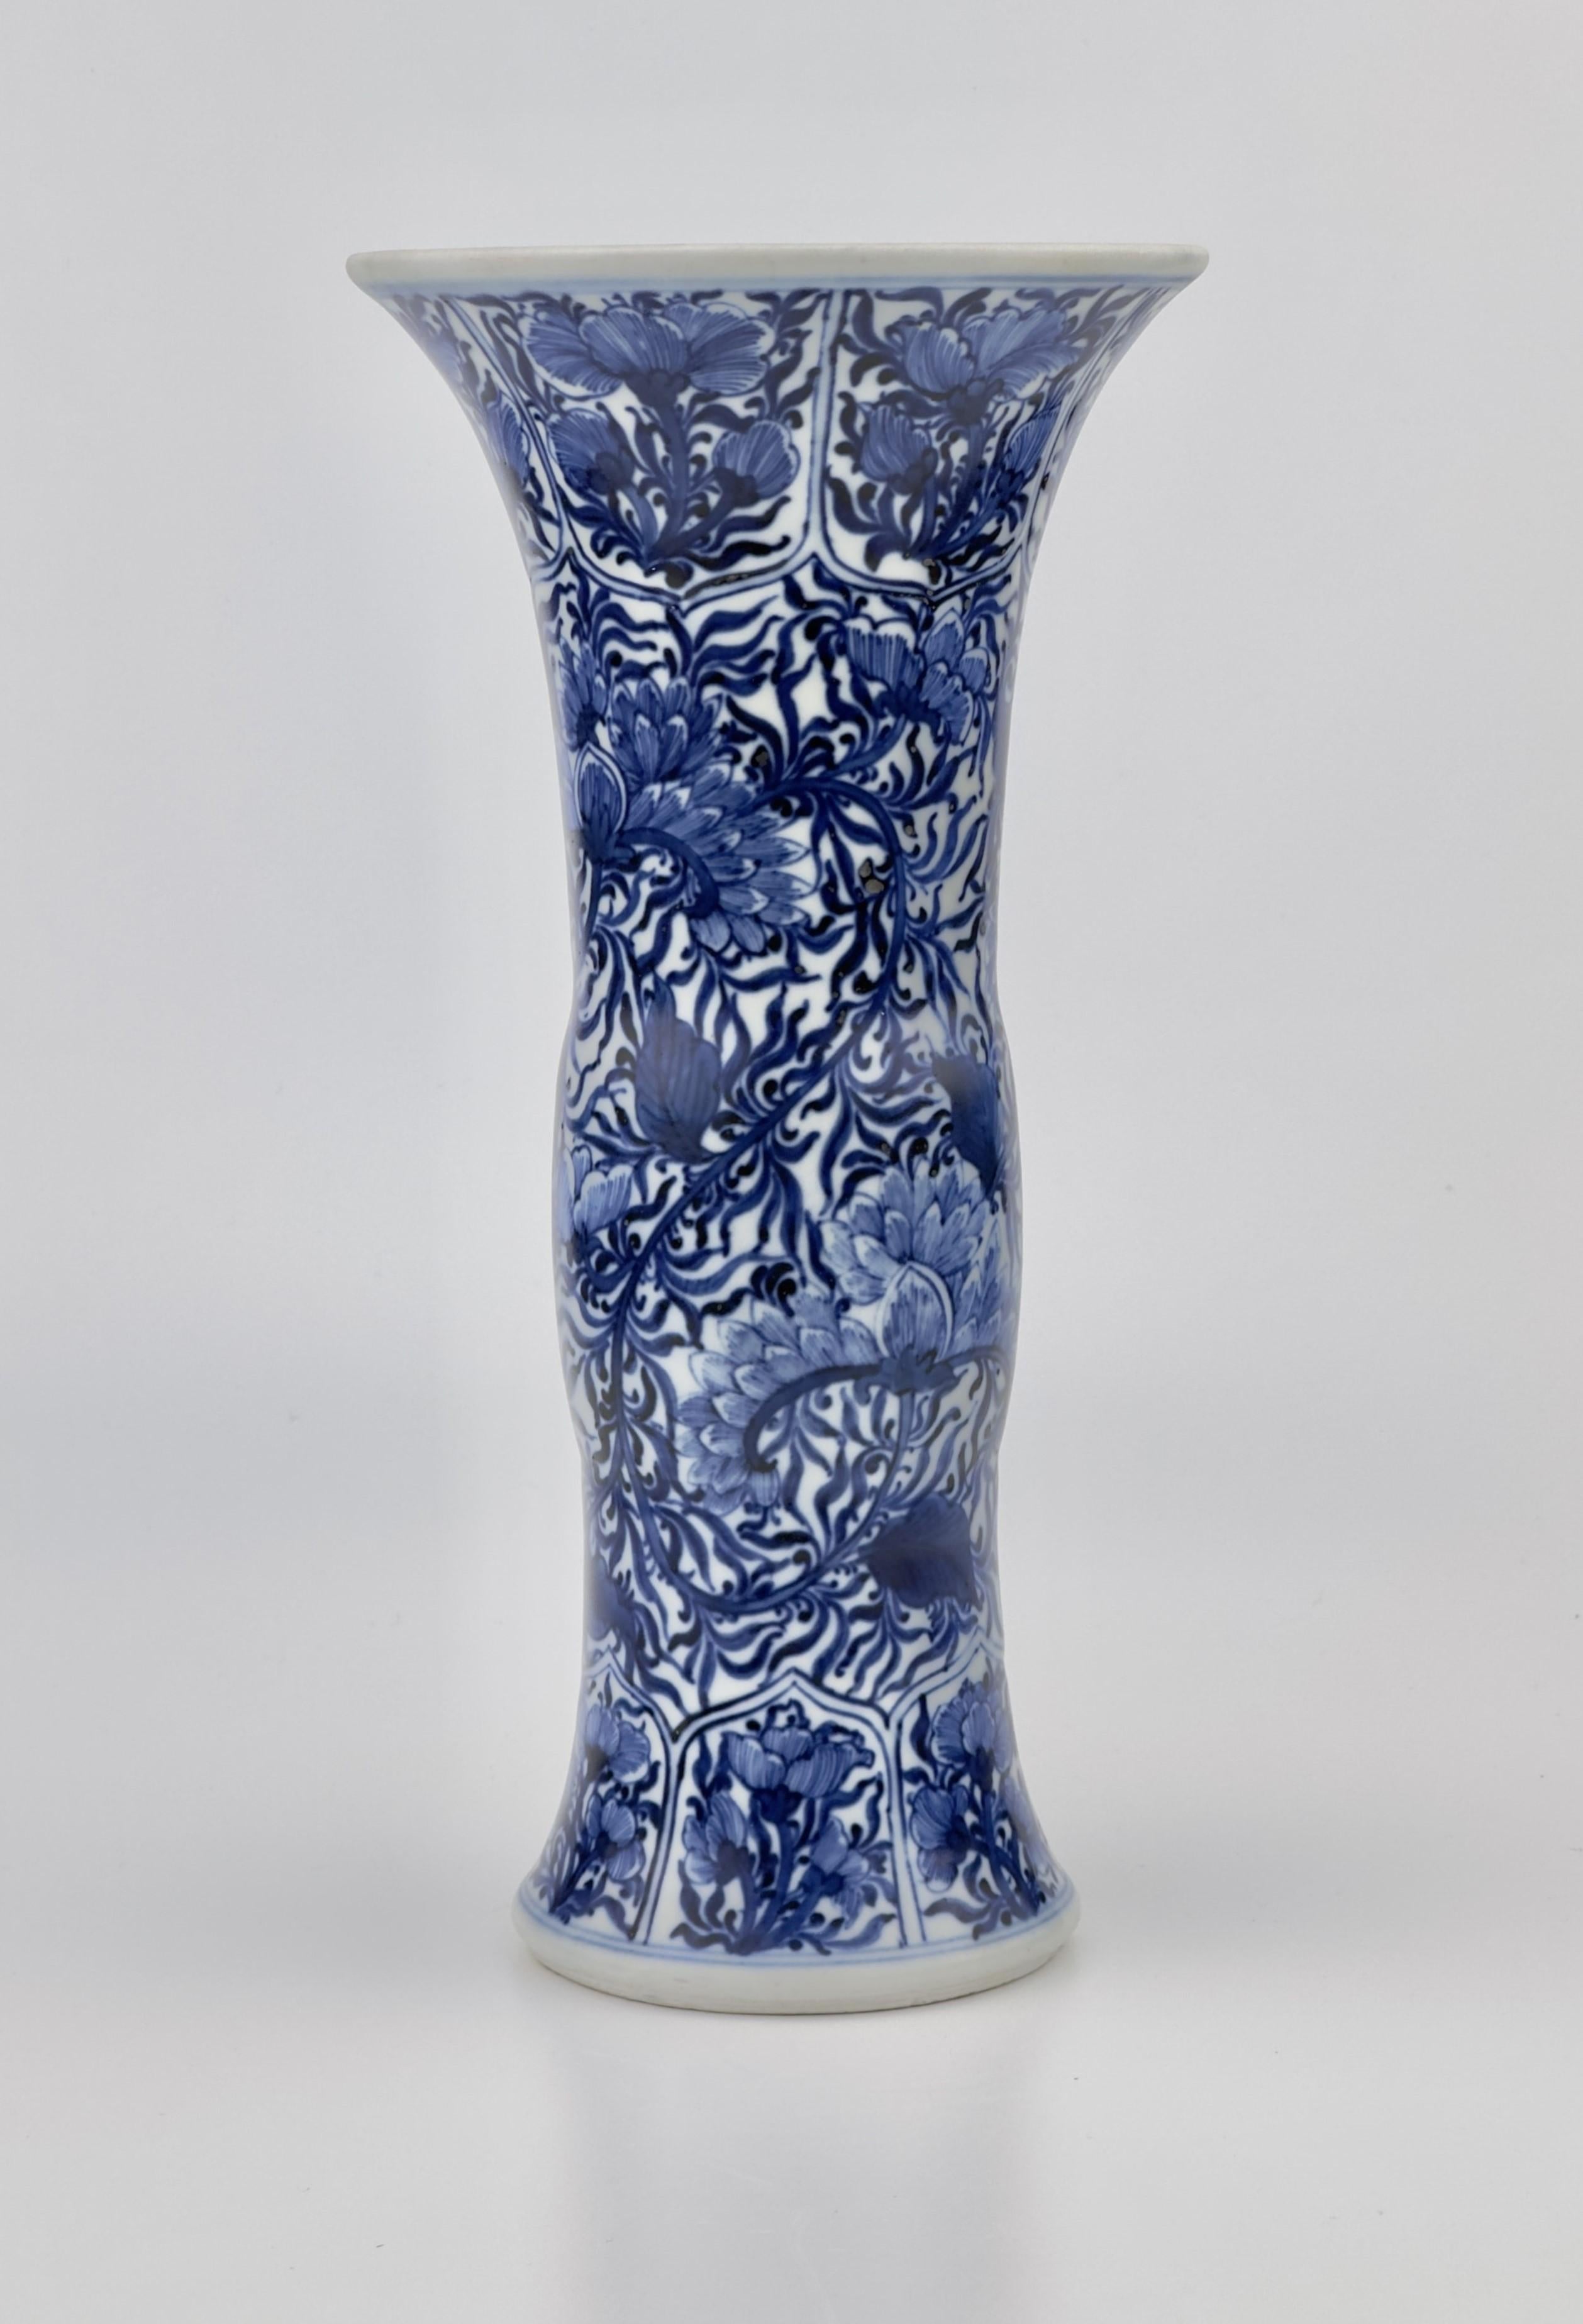 An attractive gu vase hand painted in cobalt blue with typical kangxi floral painting.

Period : Qing Dynasty, Kangxi Period
Production Date : 1690-1699
Made in : Jingdezhen
Destination : Netherland
Found/Acquired : Southeast Asia , South China Sea,